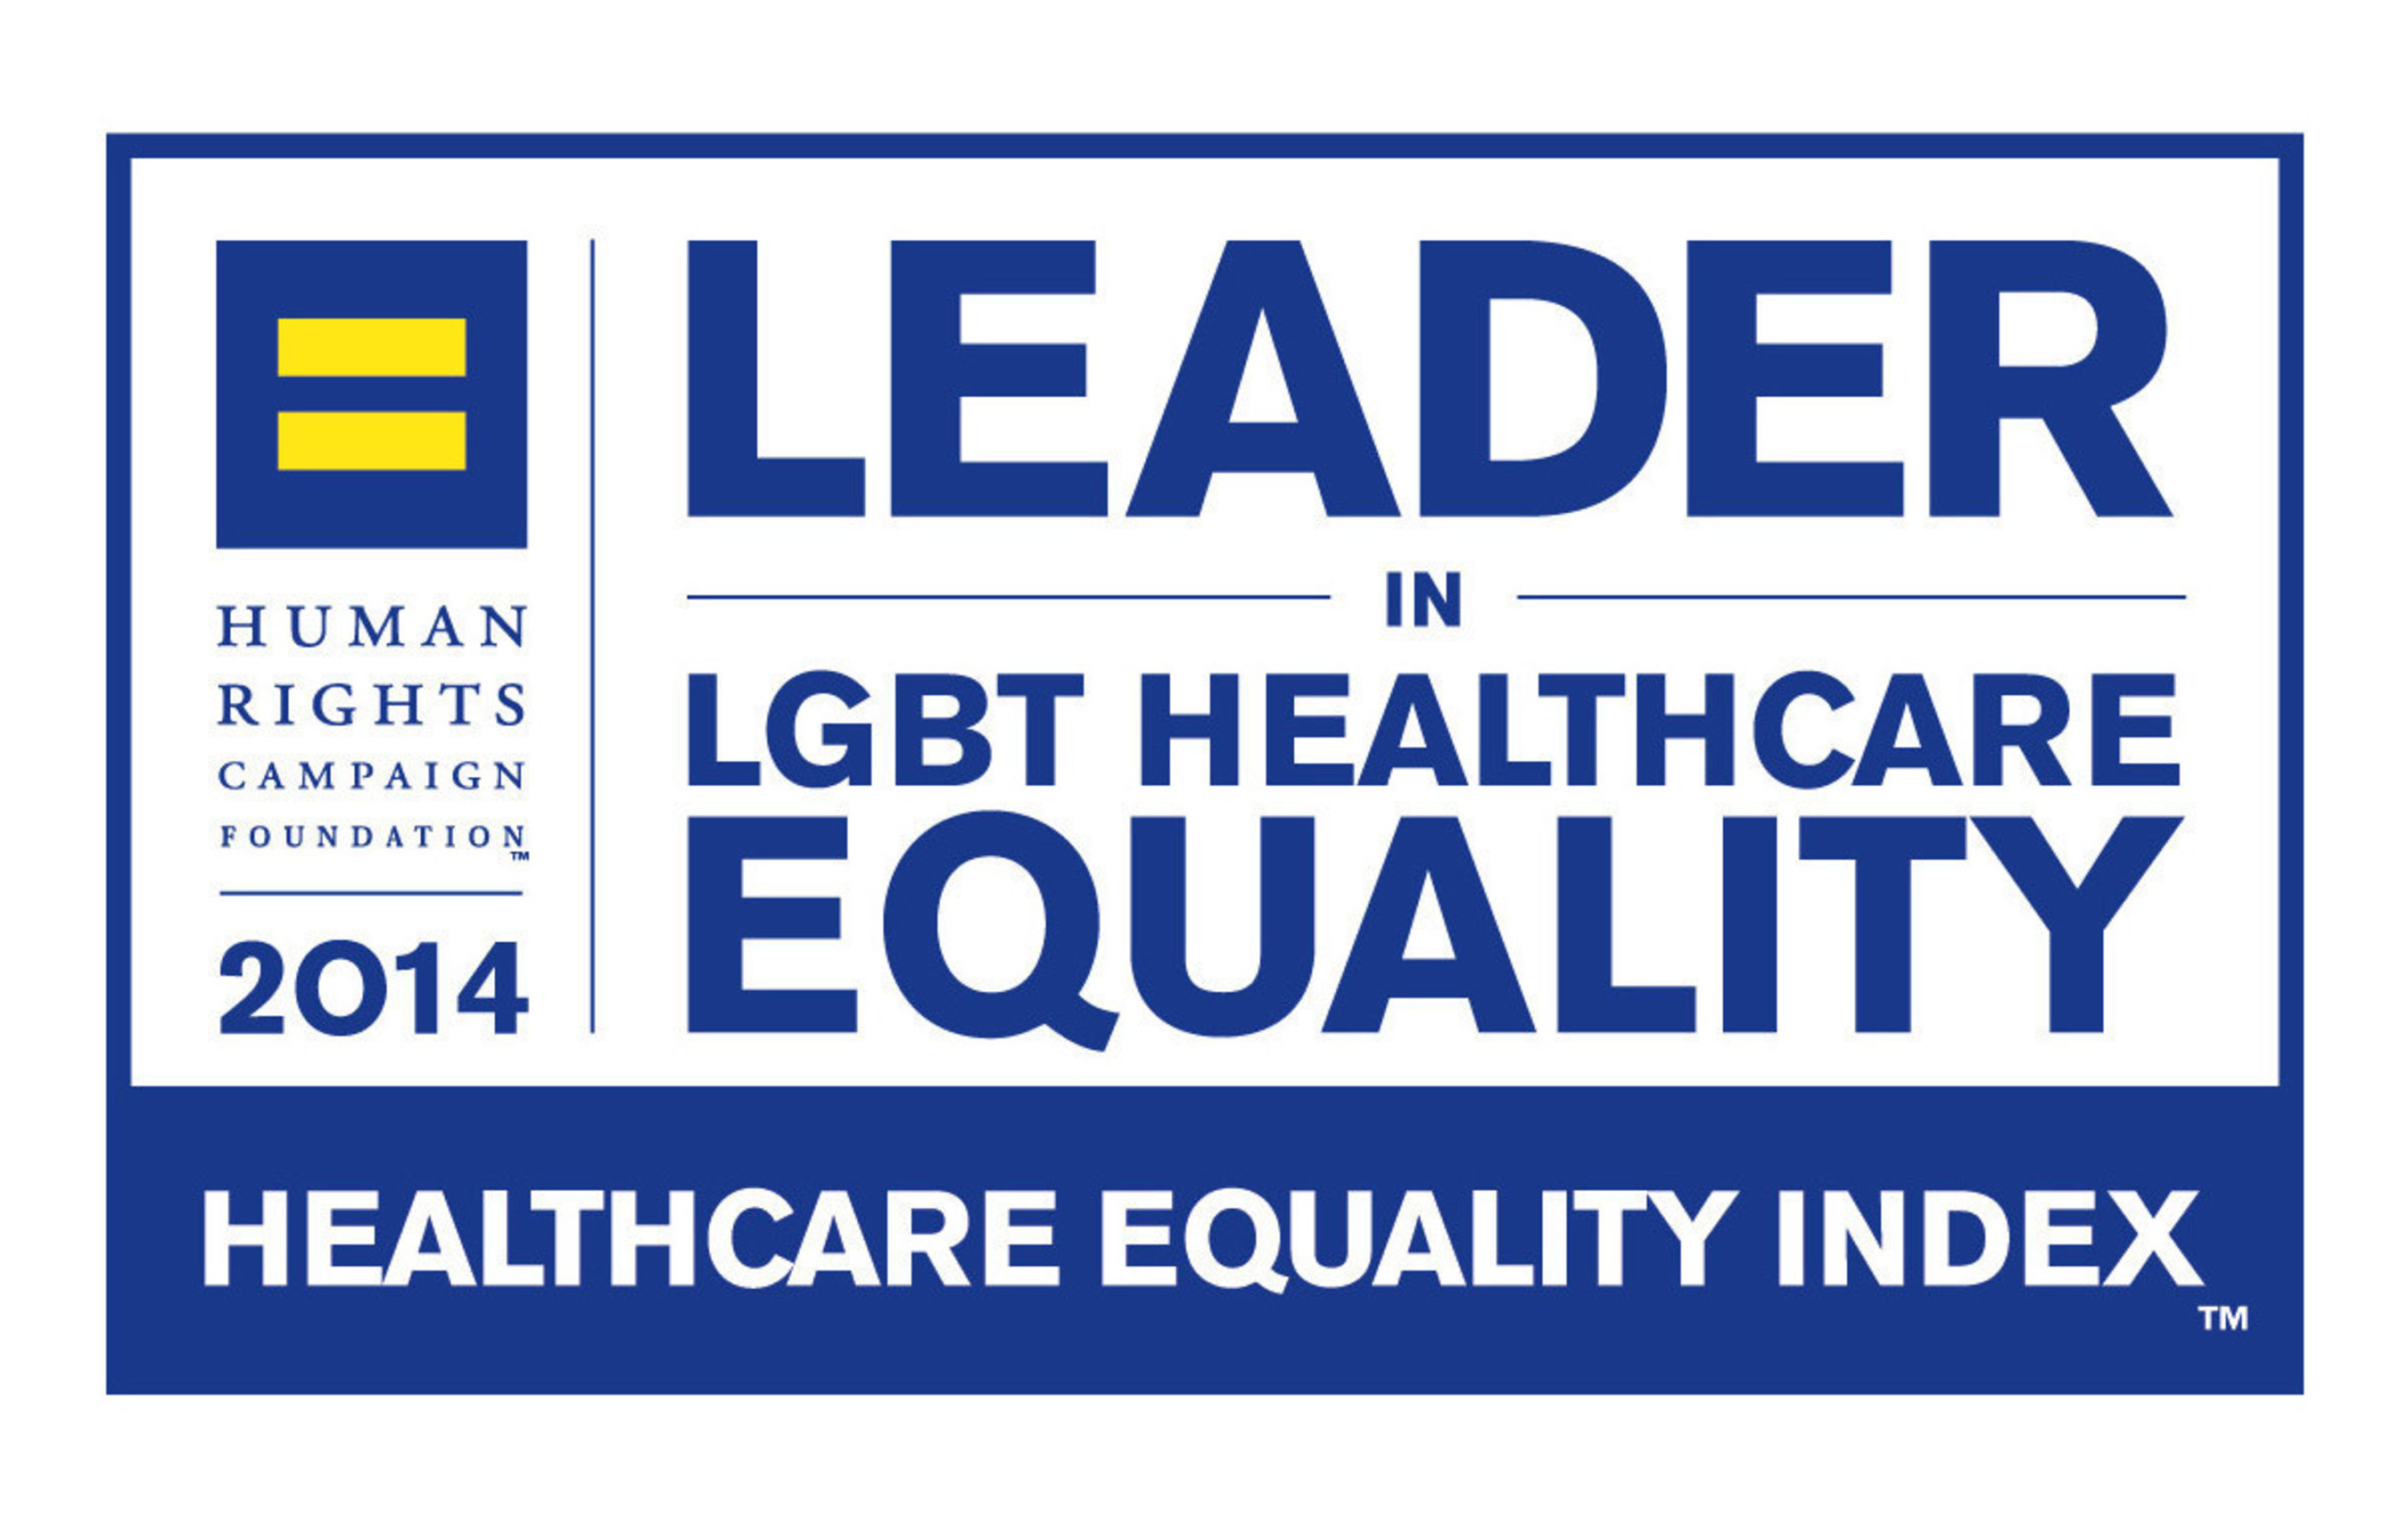 The Children's Hospital of Philadelphia has been recognized as a 2014 LGBT Healthcare Equality Leader by the Human Rights Campaign